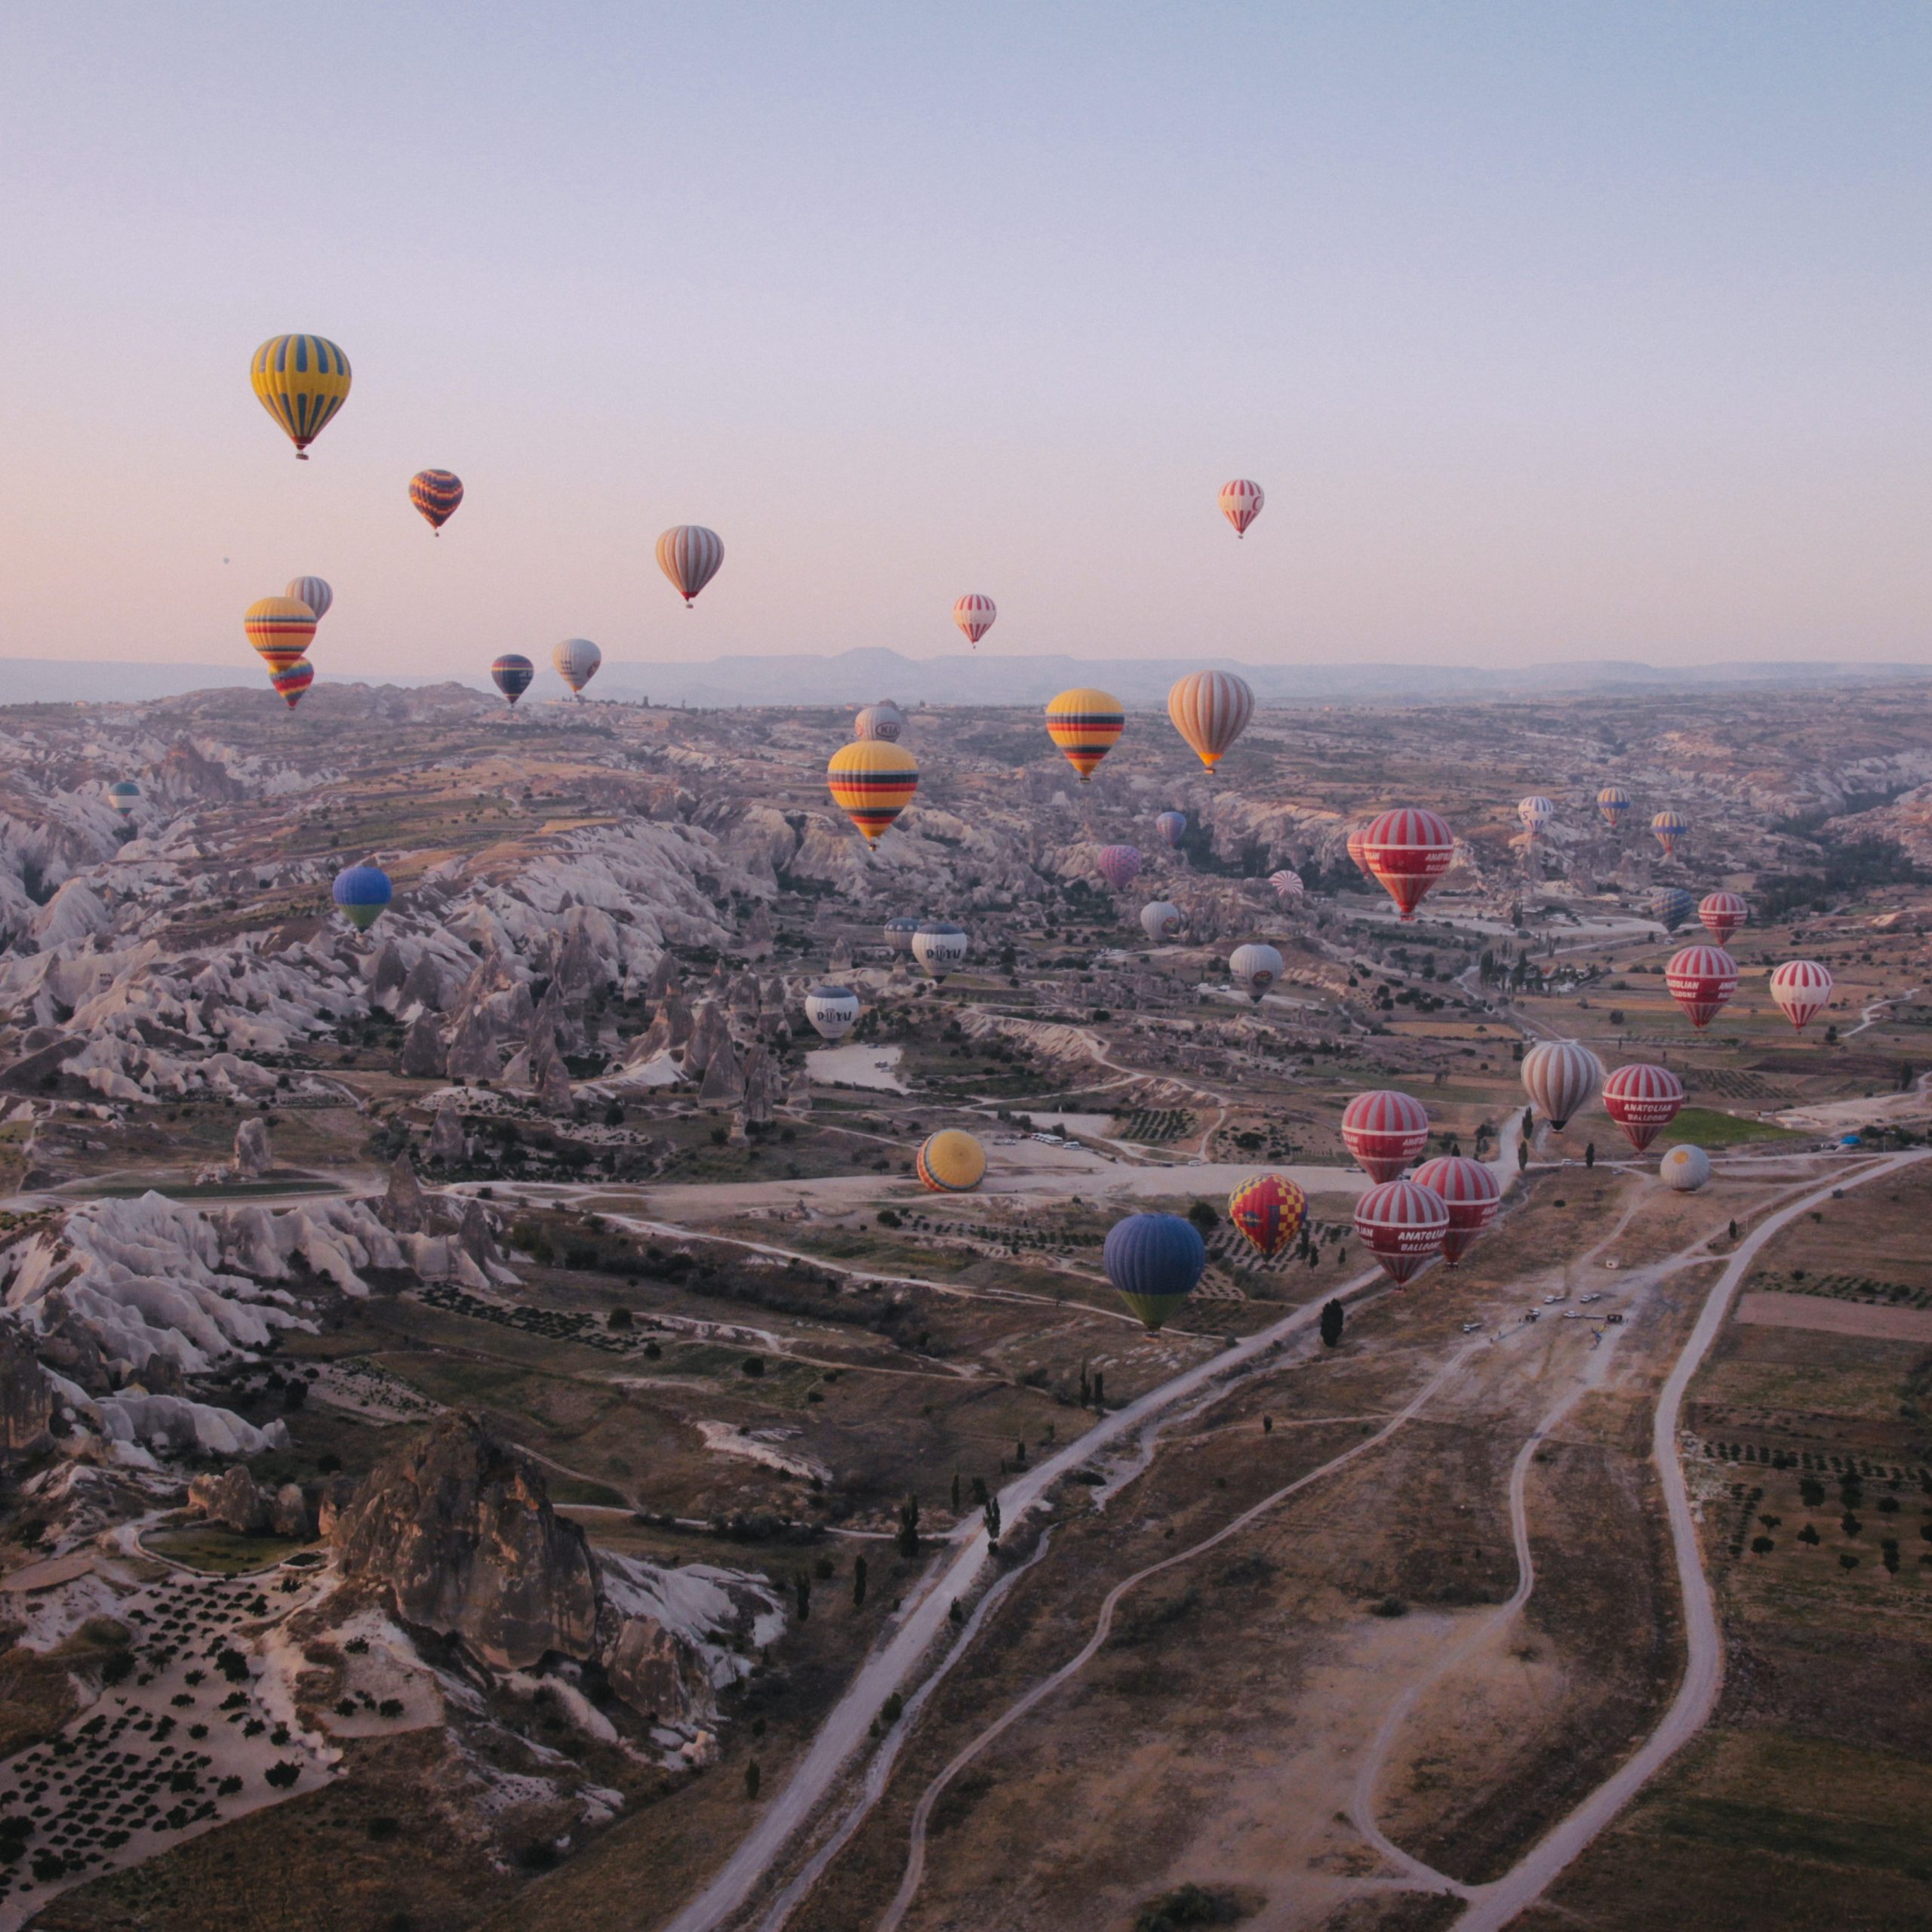 Day 1: Welcome to Cappadocia, Turkey